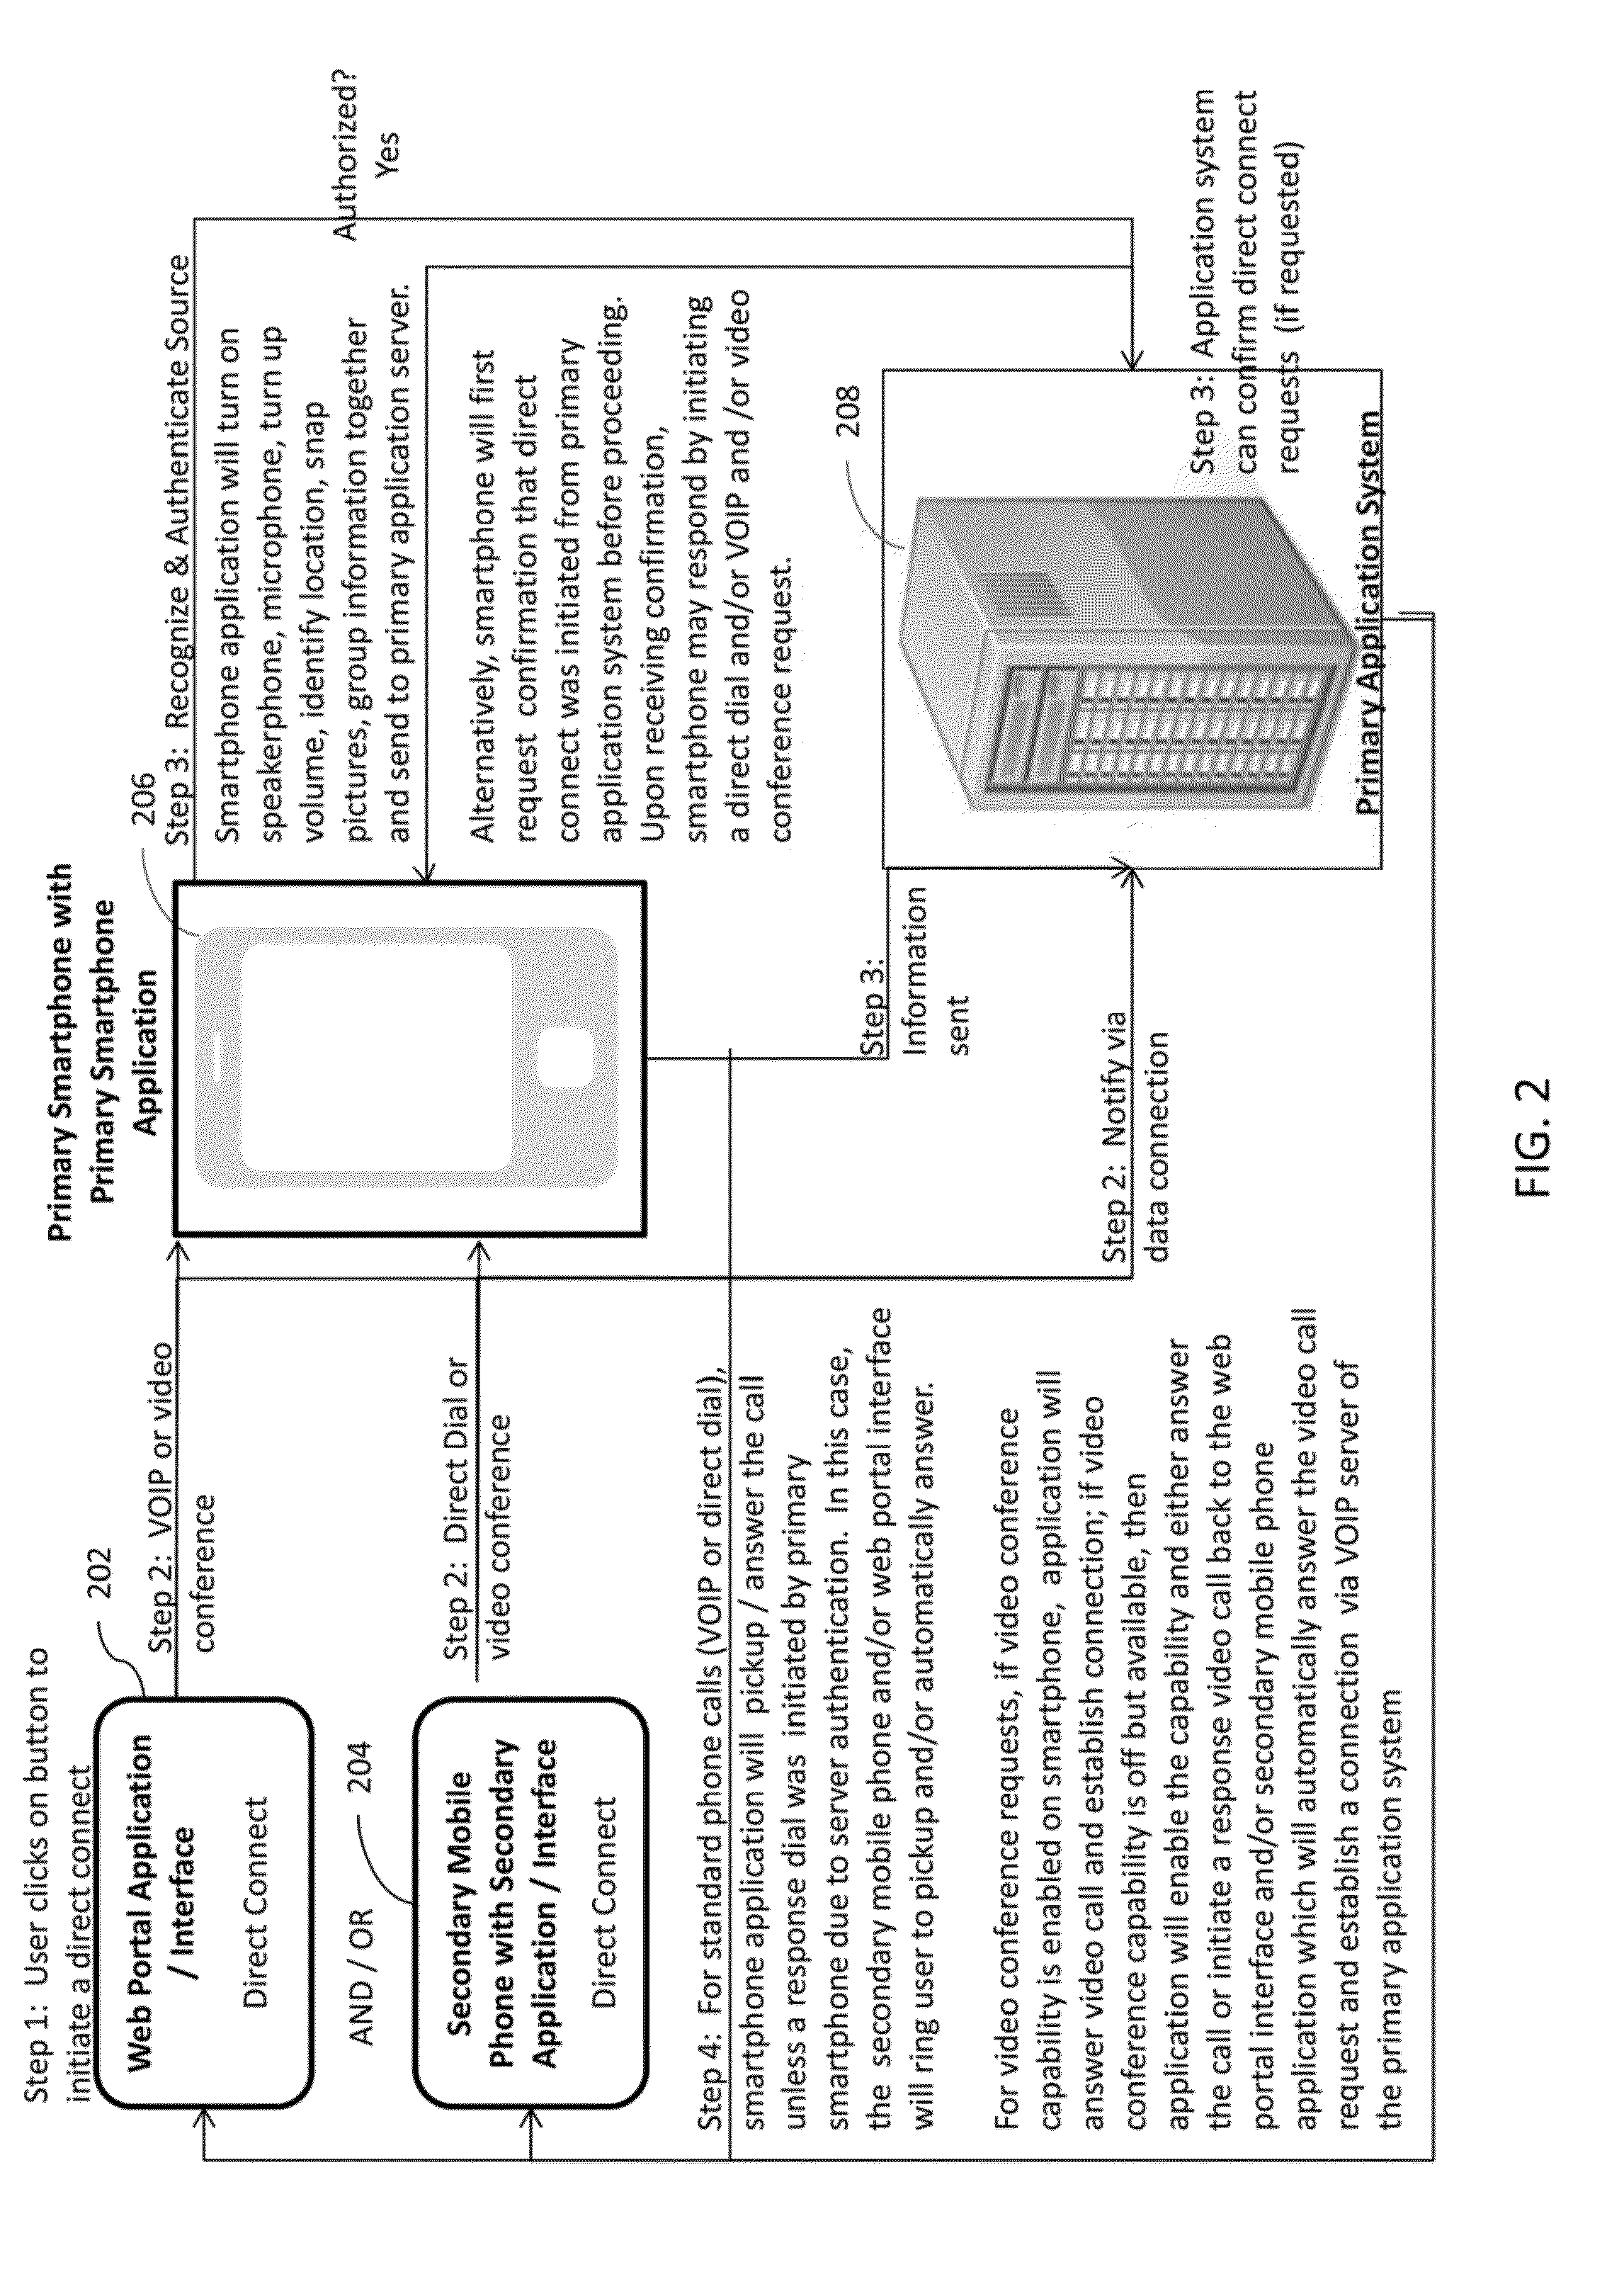 System and method for remote care and monitoring using a mobile device